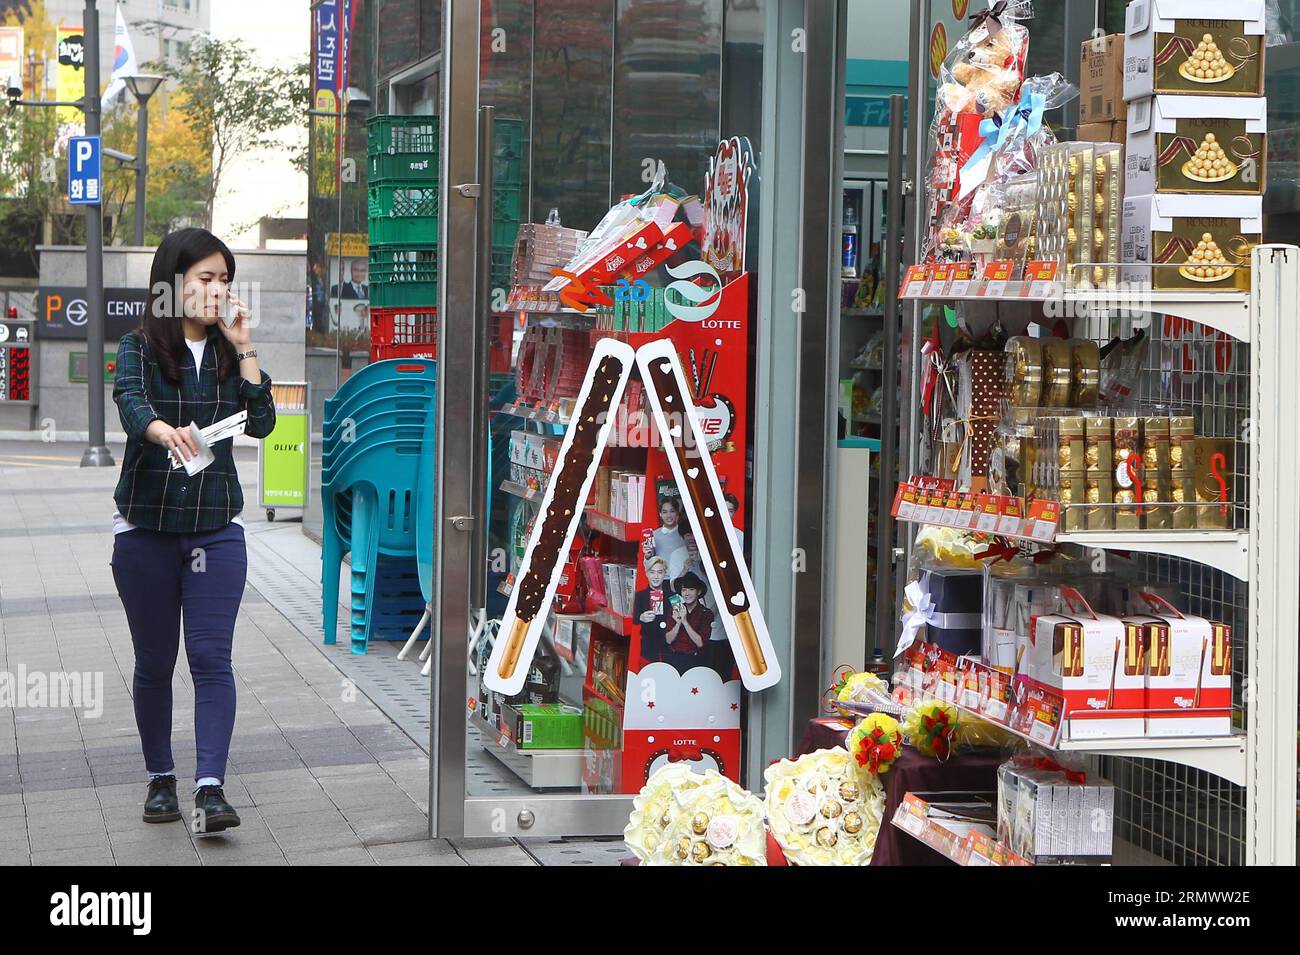 A woman walks past a grocery store in Seoul, South Korea, Nov. 11, 2014. Pepero Day is celebrated annually on Nov. 11 in South Korea, with stores selling pepero chocolate sticks and single people trying to find their Mr or Mrs Rights. ) SOUTH KOREA-PEPERO DAY-SALE YaoxQilin PUBLICATIONxNOTxINxCHN   a Woman Walks Past a Grocery Store in Seoul South Korea Nov 11 2014  Day IS celebrated annually ON Nov 11 in South Korea With Stores Selling  Chocolate Sticks and Single Celebrities trying to find their Mr or Mrs Rights South Korea  Day Sale  PUBLICATIONxNOTxINxCHN Stock Photo